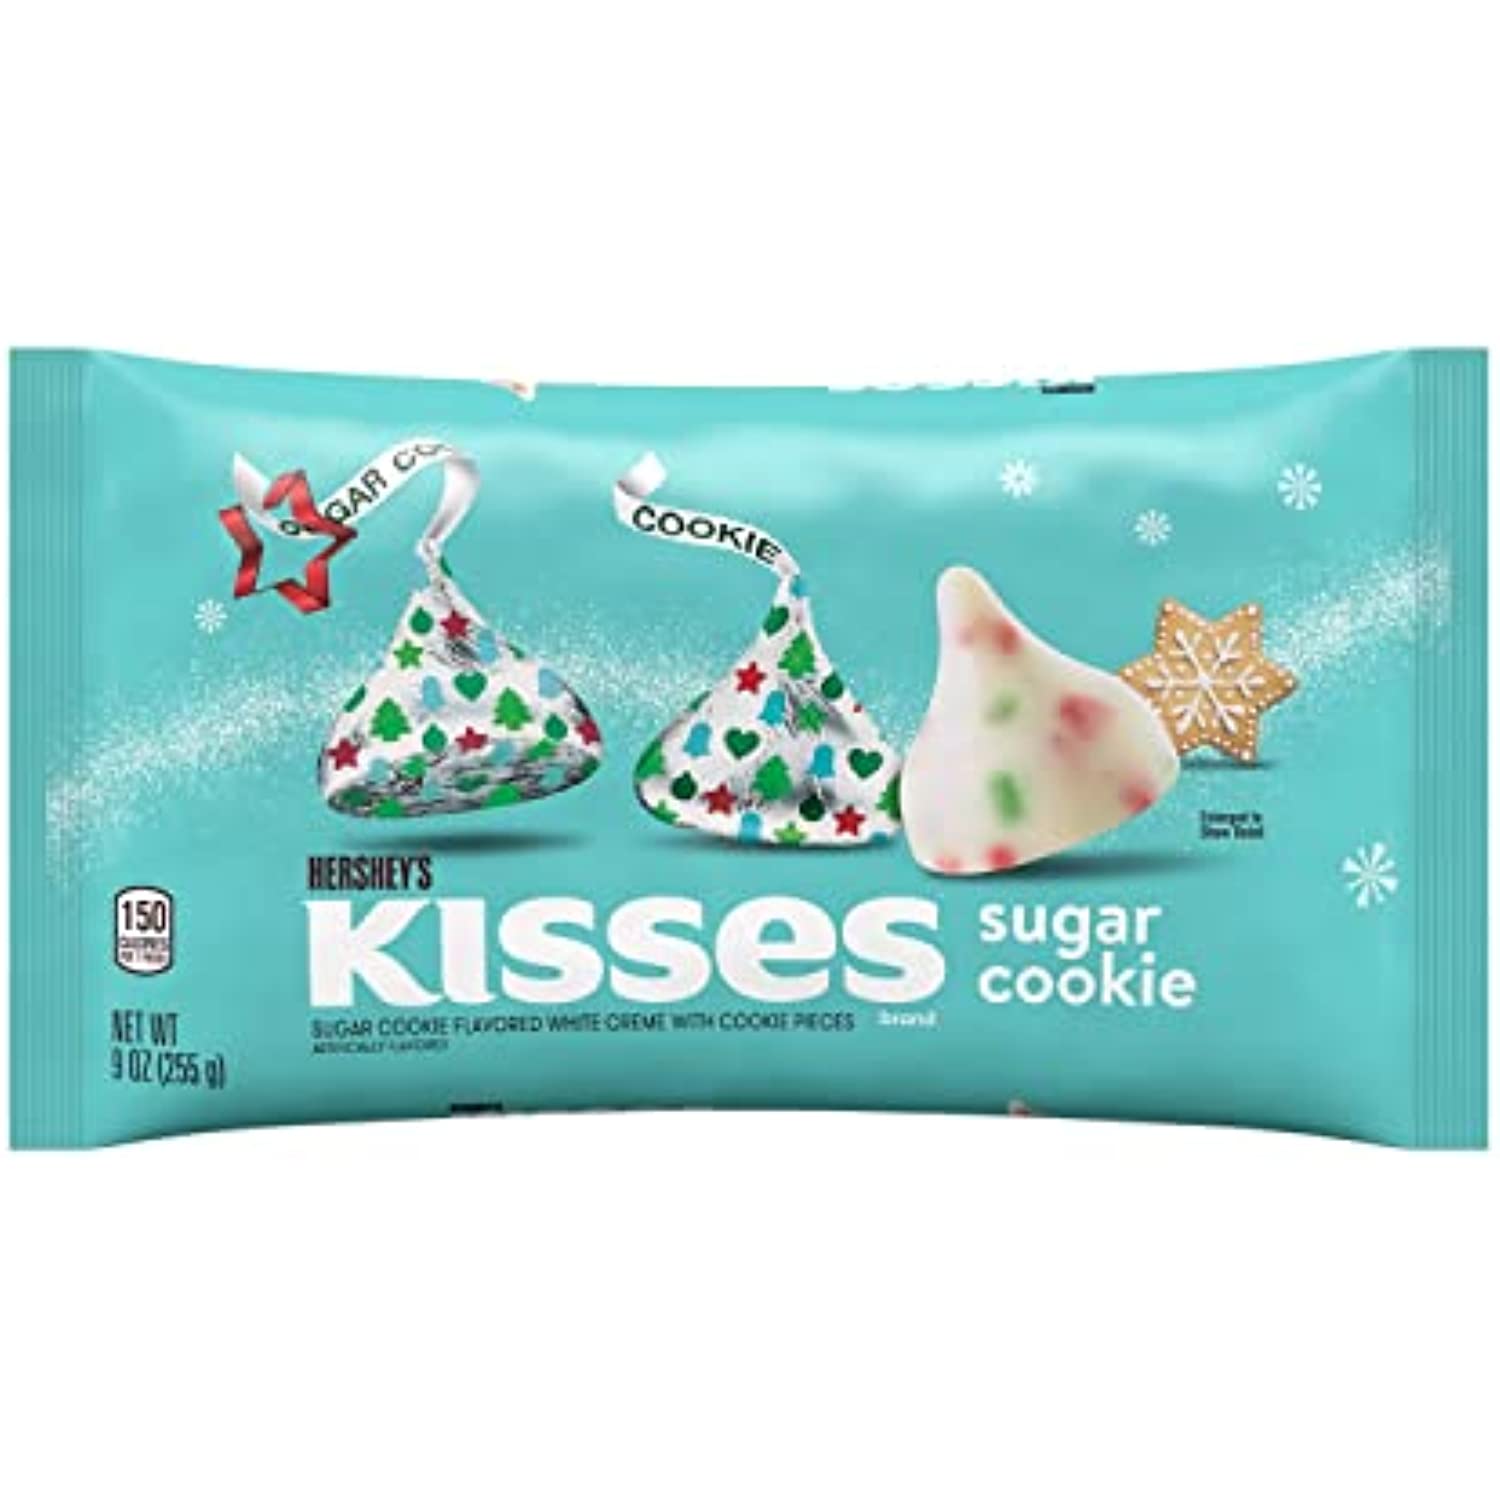 HERSHEY'S KISSES Sugar Cookie Flavored White Creme with Cookie Pieces Candy, Holiday, 9 oz Bag